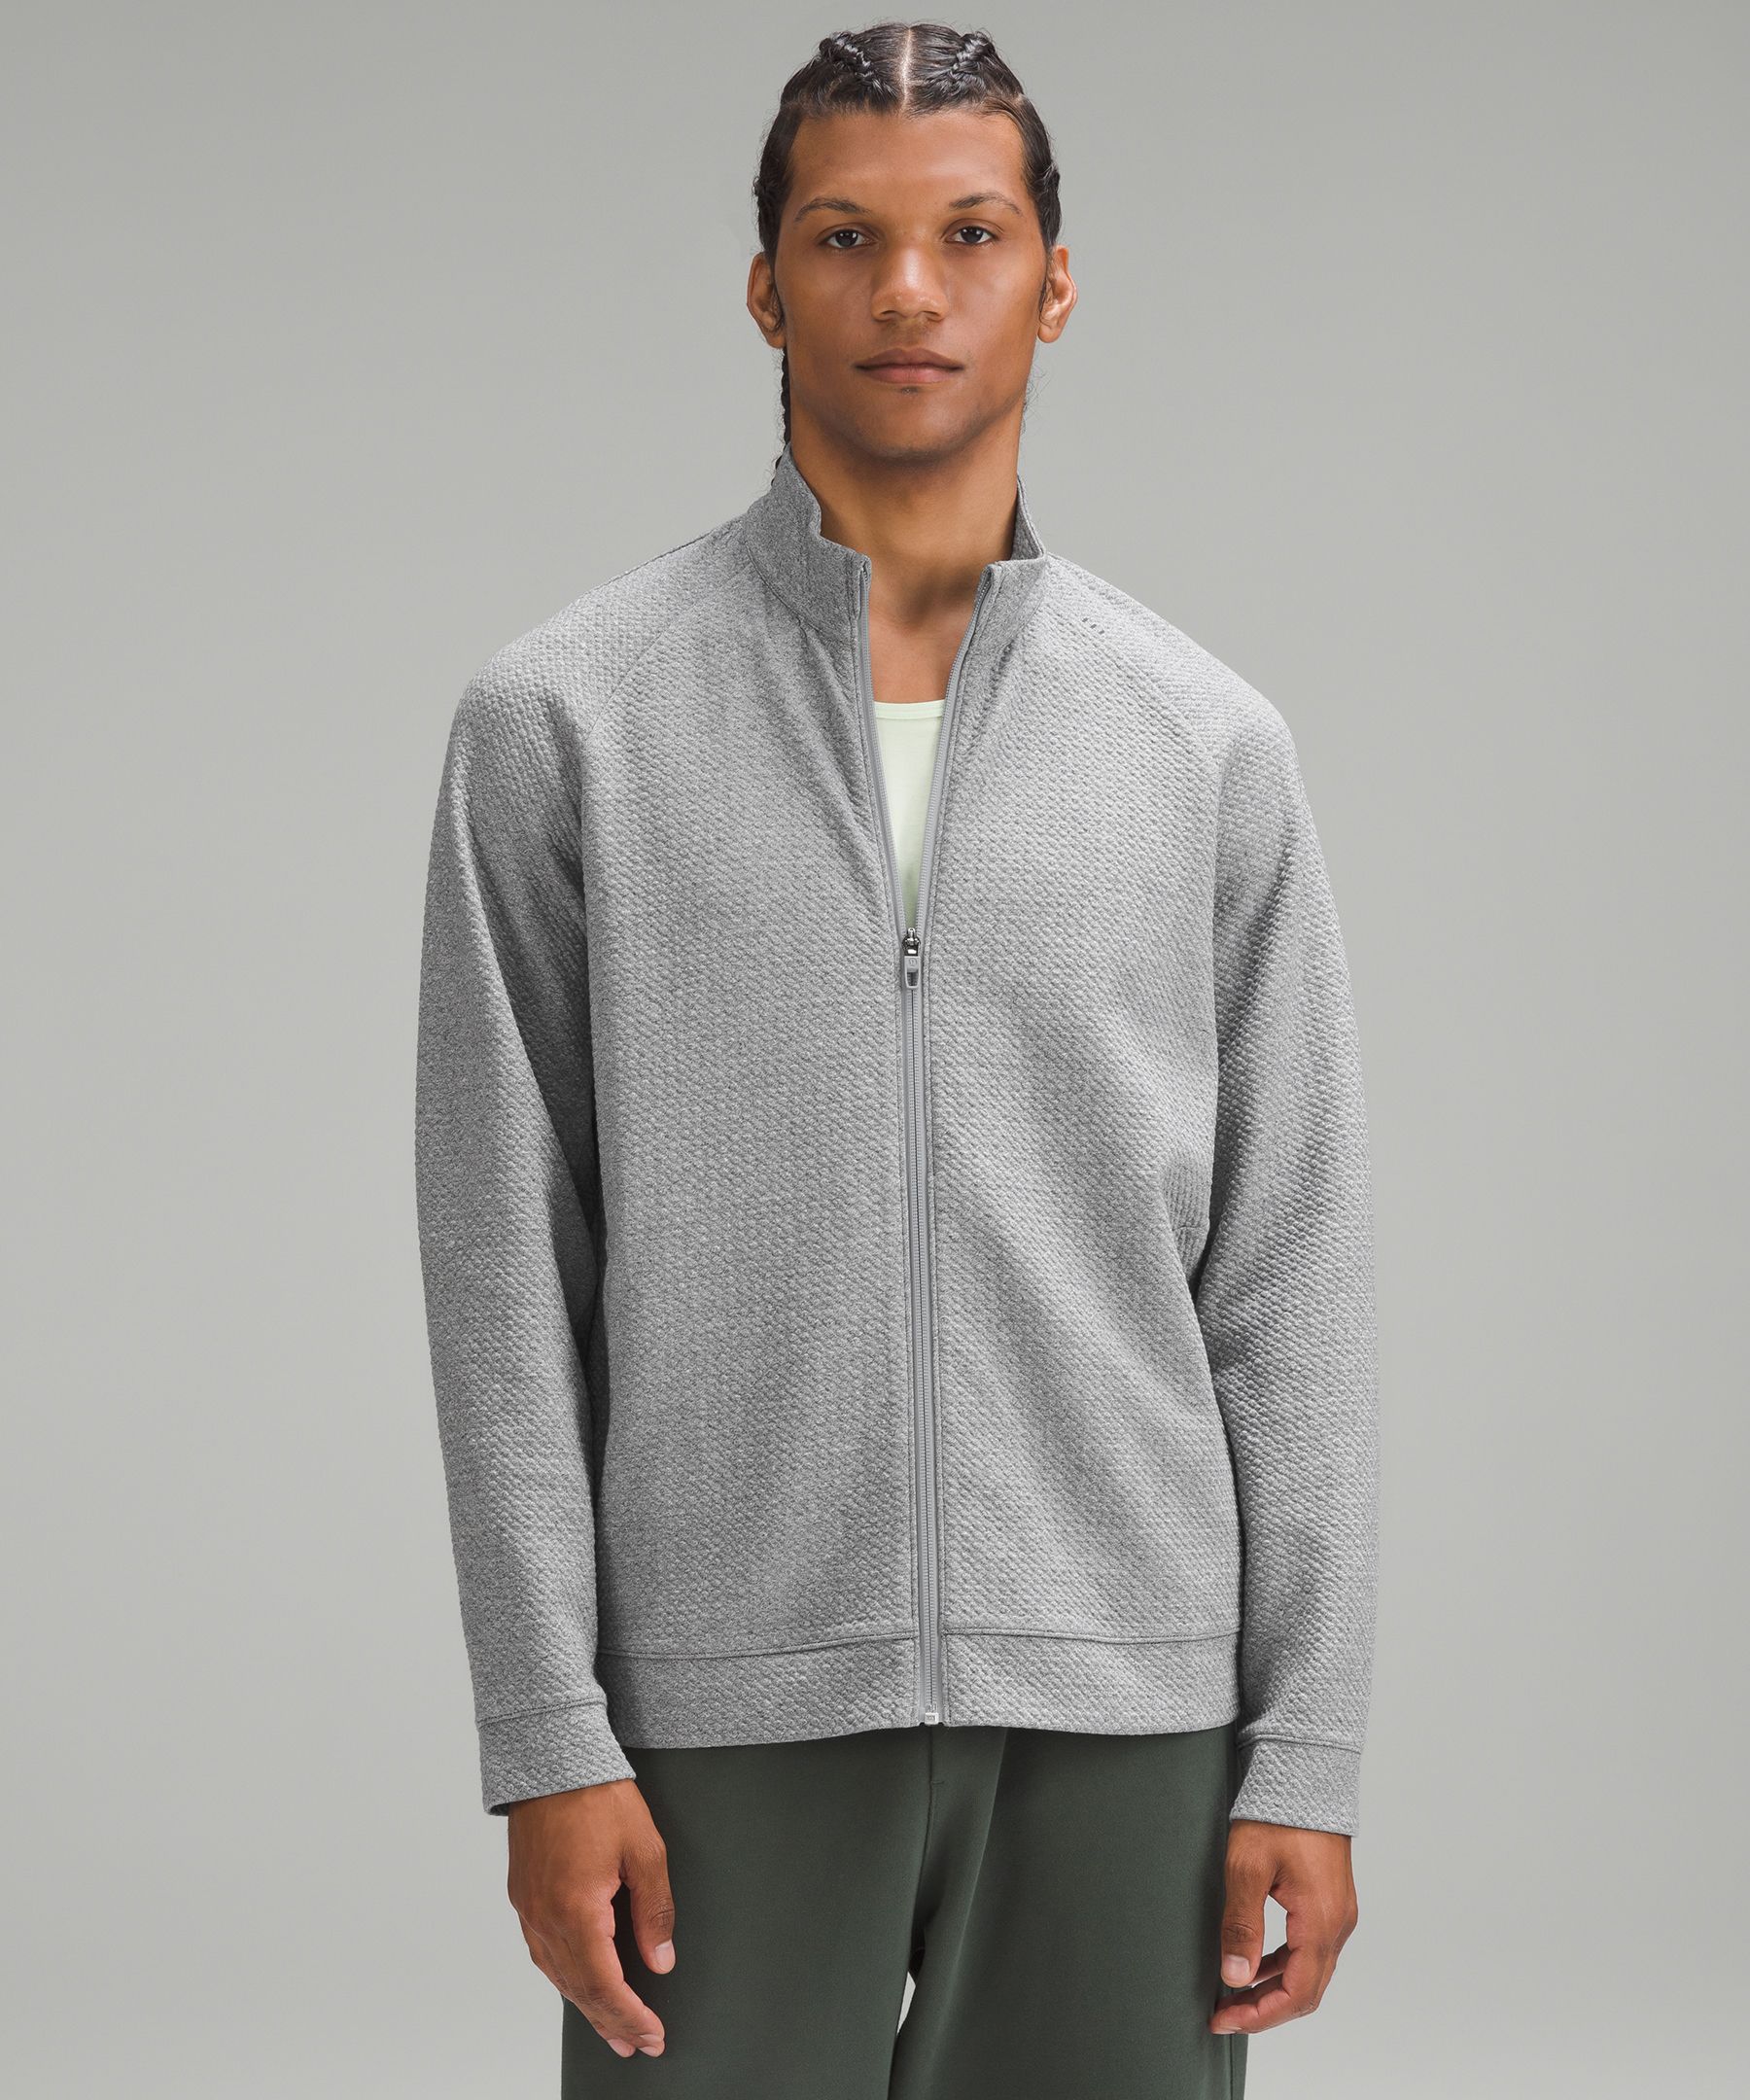 Textured Double-Knit Cotton Zip Up